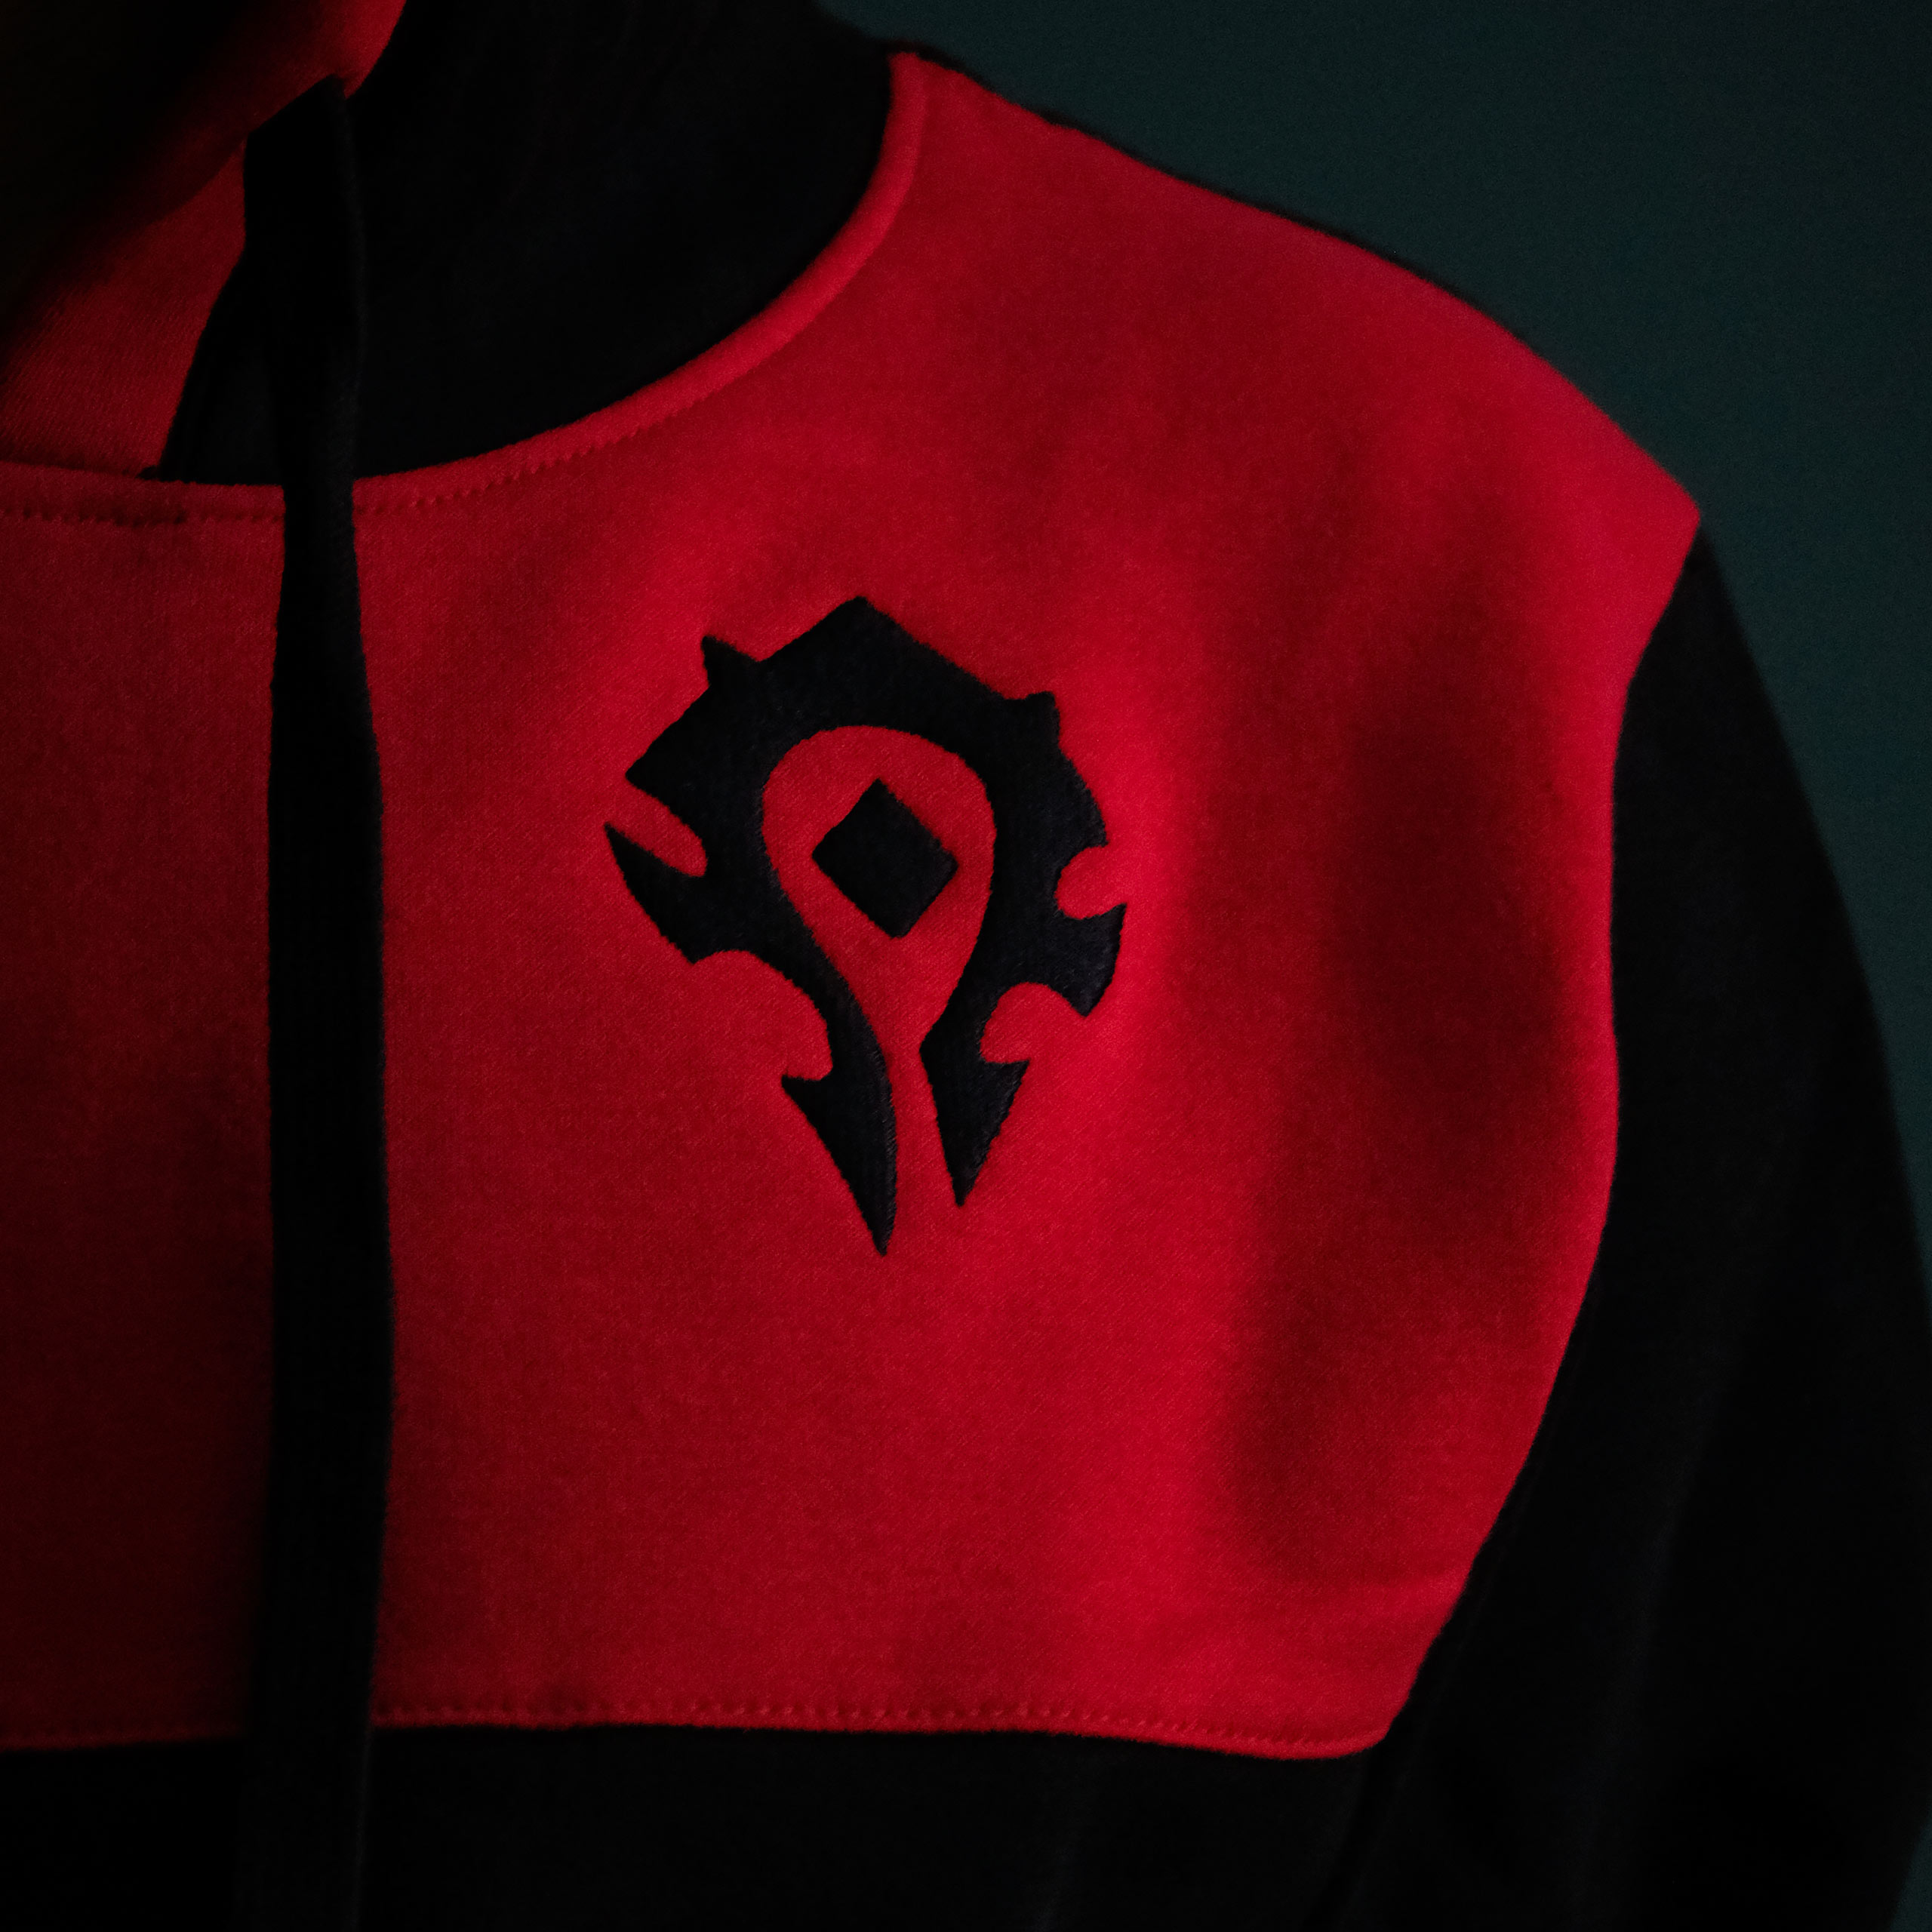 World of Warcraft - Horde to the End Hoodie